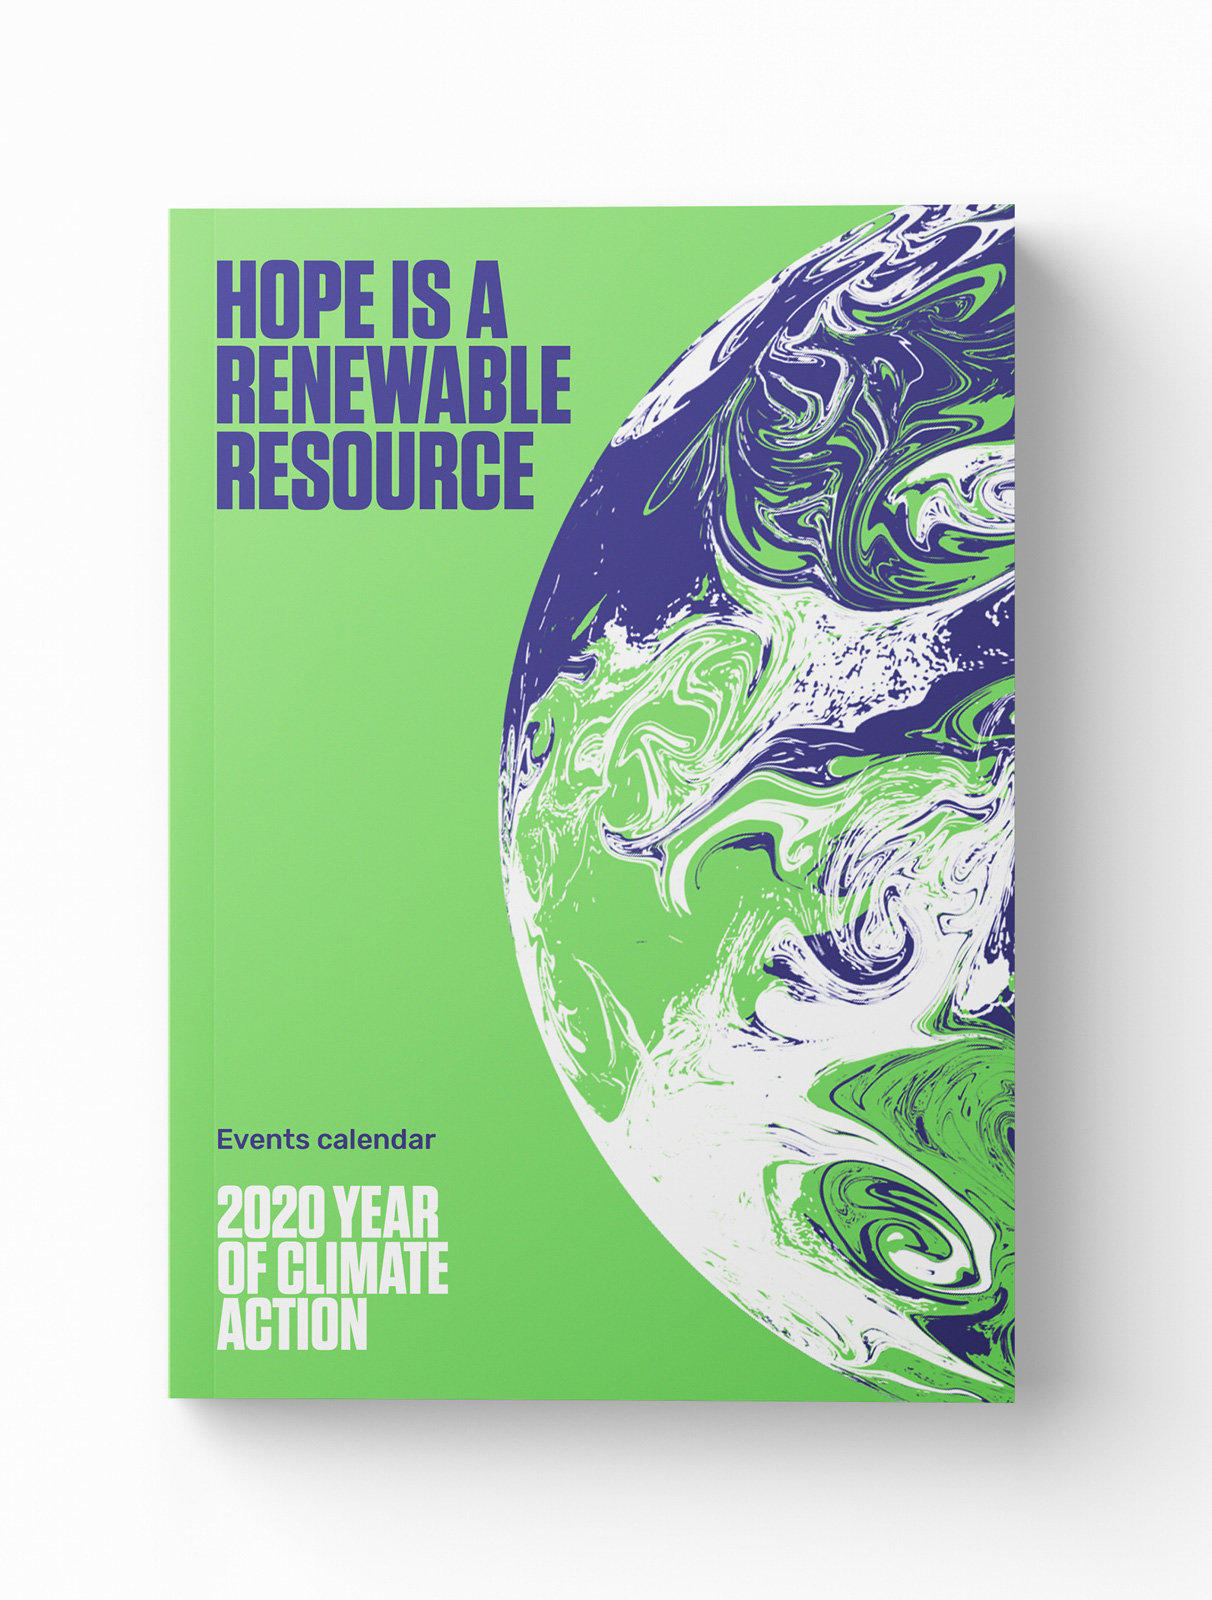 Noted New Logo and Identity for 26th UN Climate Change Conference by